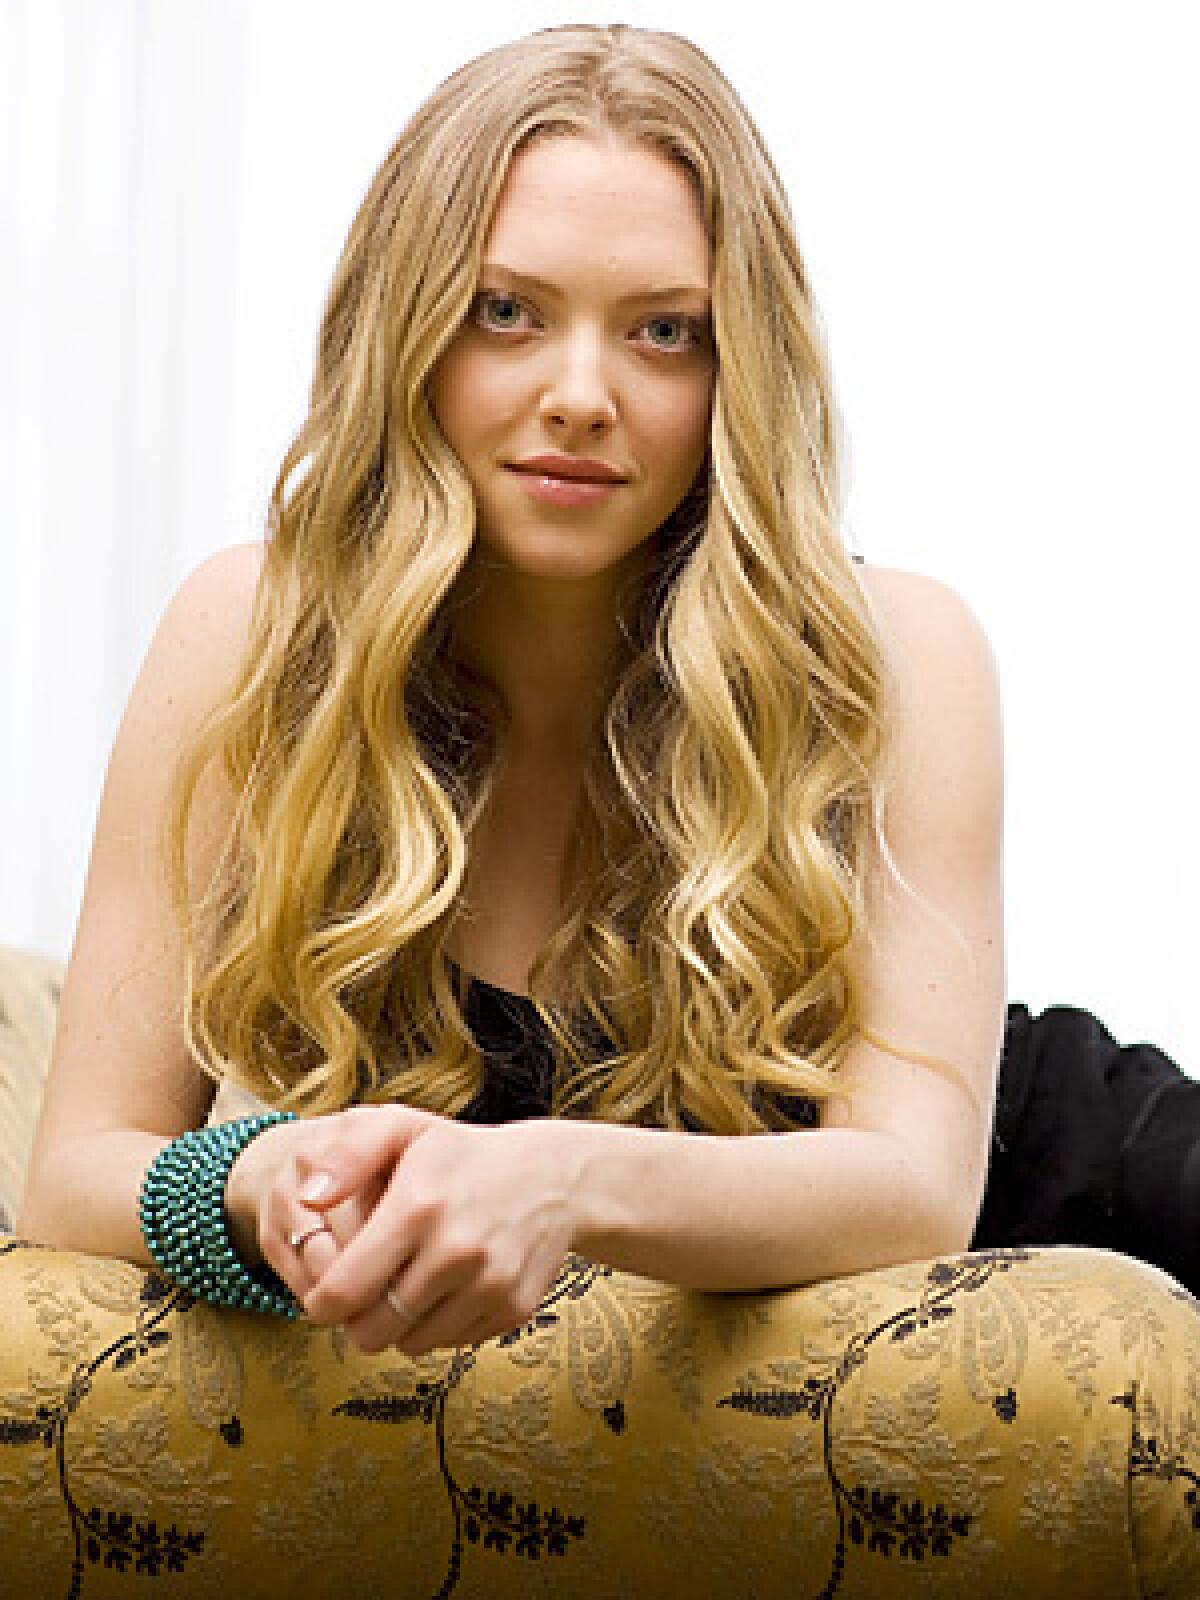 A MUSICAL BENT: Unlike many of her costars, Seyfried felt at home with the format.